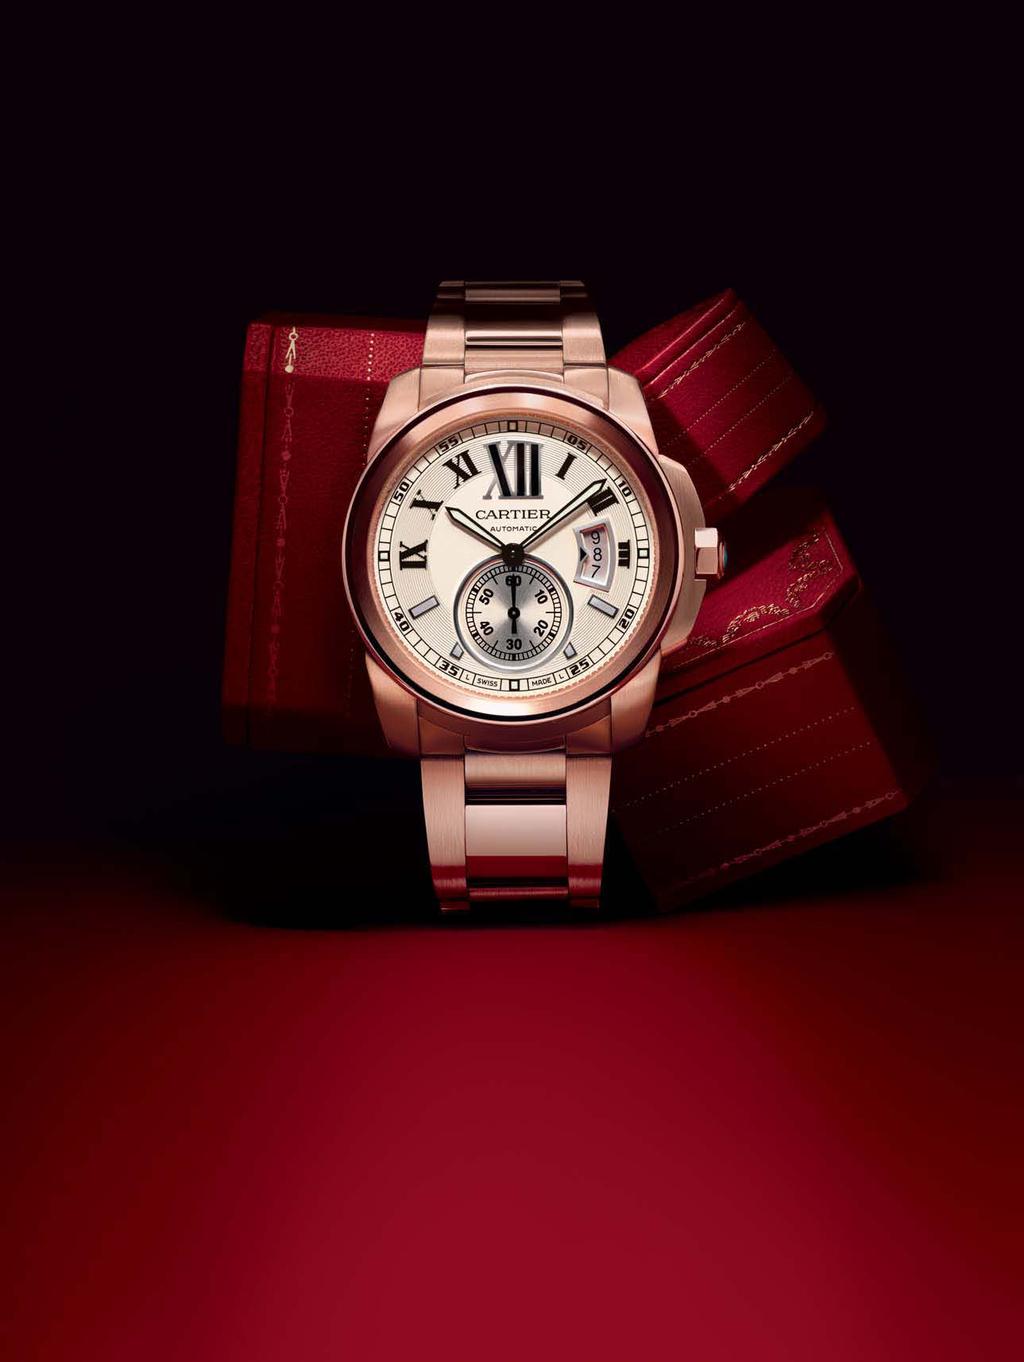 cartier.com calibre de cartier 1904 MC MANUFACTURE MOVEMENT AS ITS NAME SUGGESTS, THE CALIBRE 1904 MC IS THE EMBODIMENT OF A CENTURY OF CARTIER S PASSION FOR TECHNICAL EXCELLENCE.